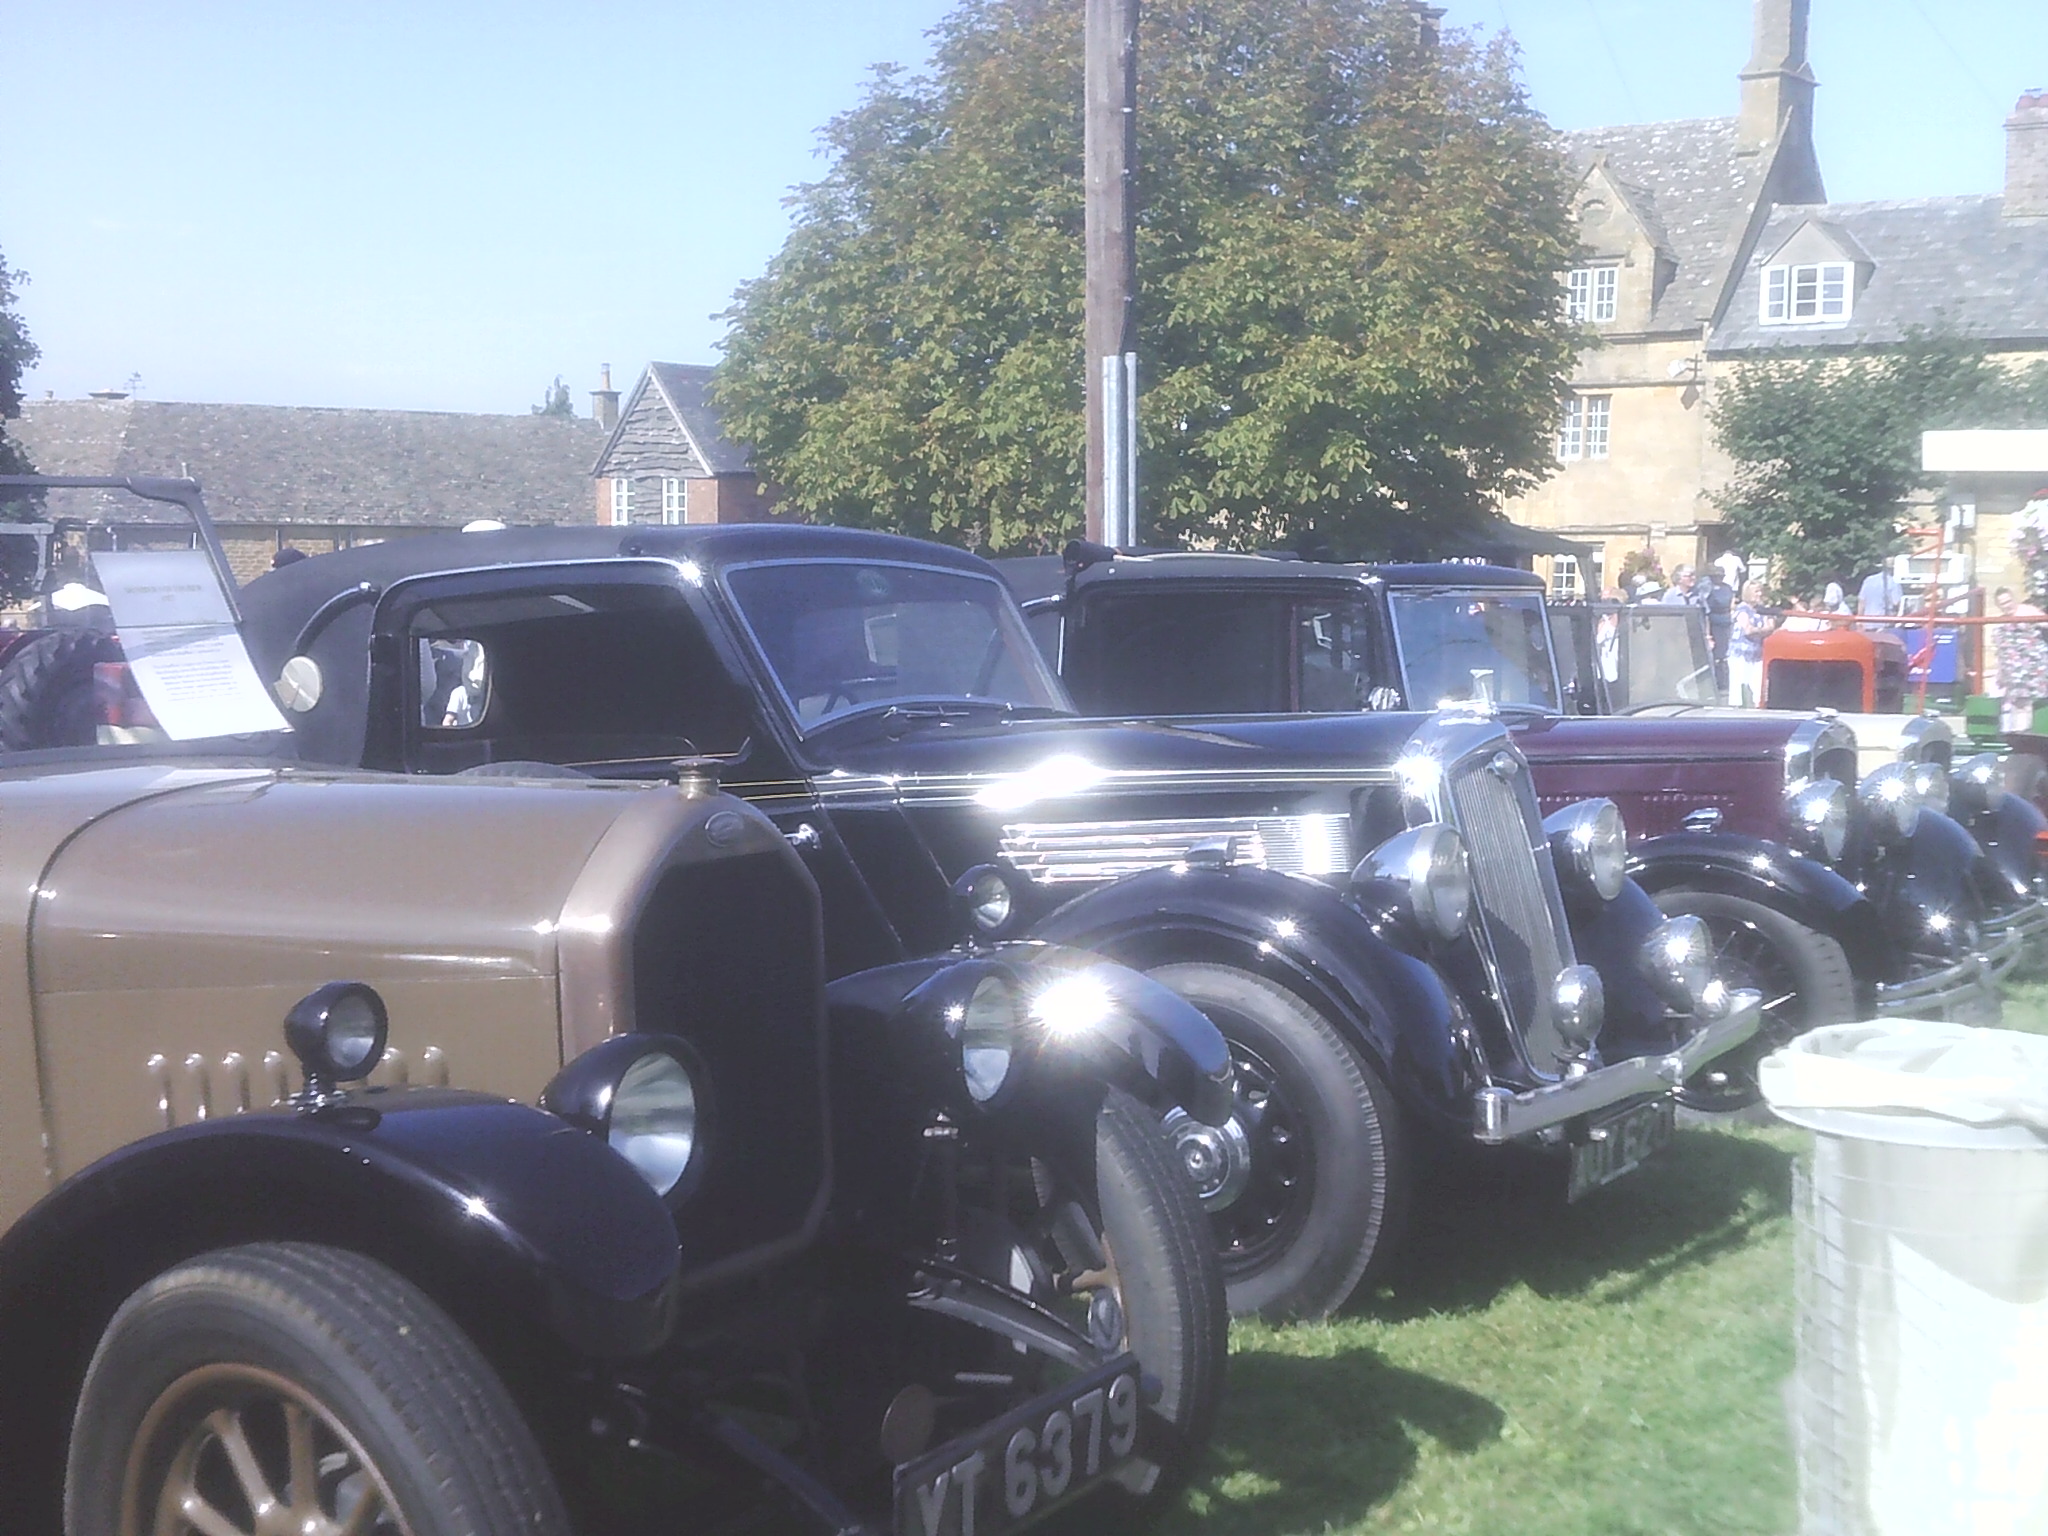 Vintage car headlights at the Willersey Show